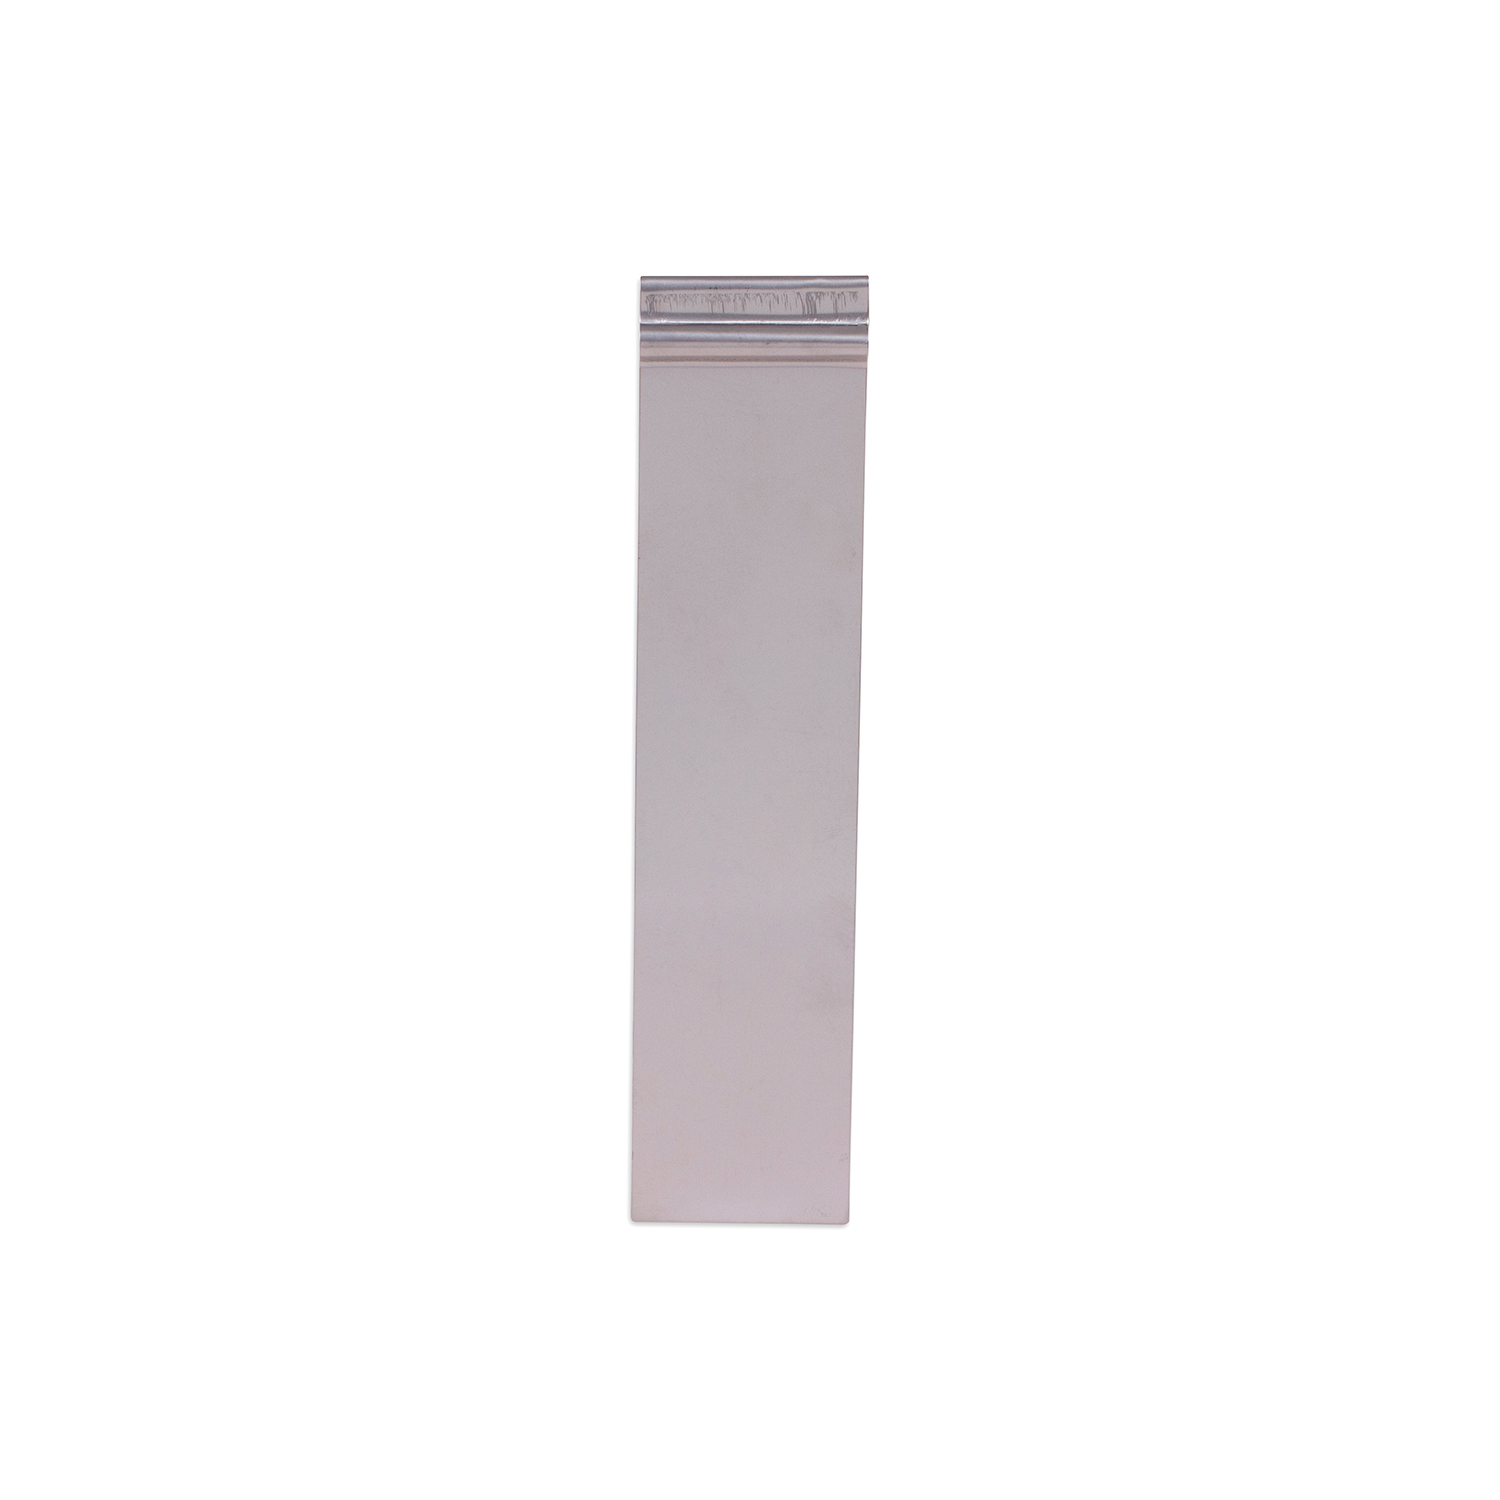 Stainless steel anode, 200 x 50 x 0.5 mm